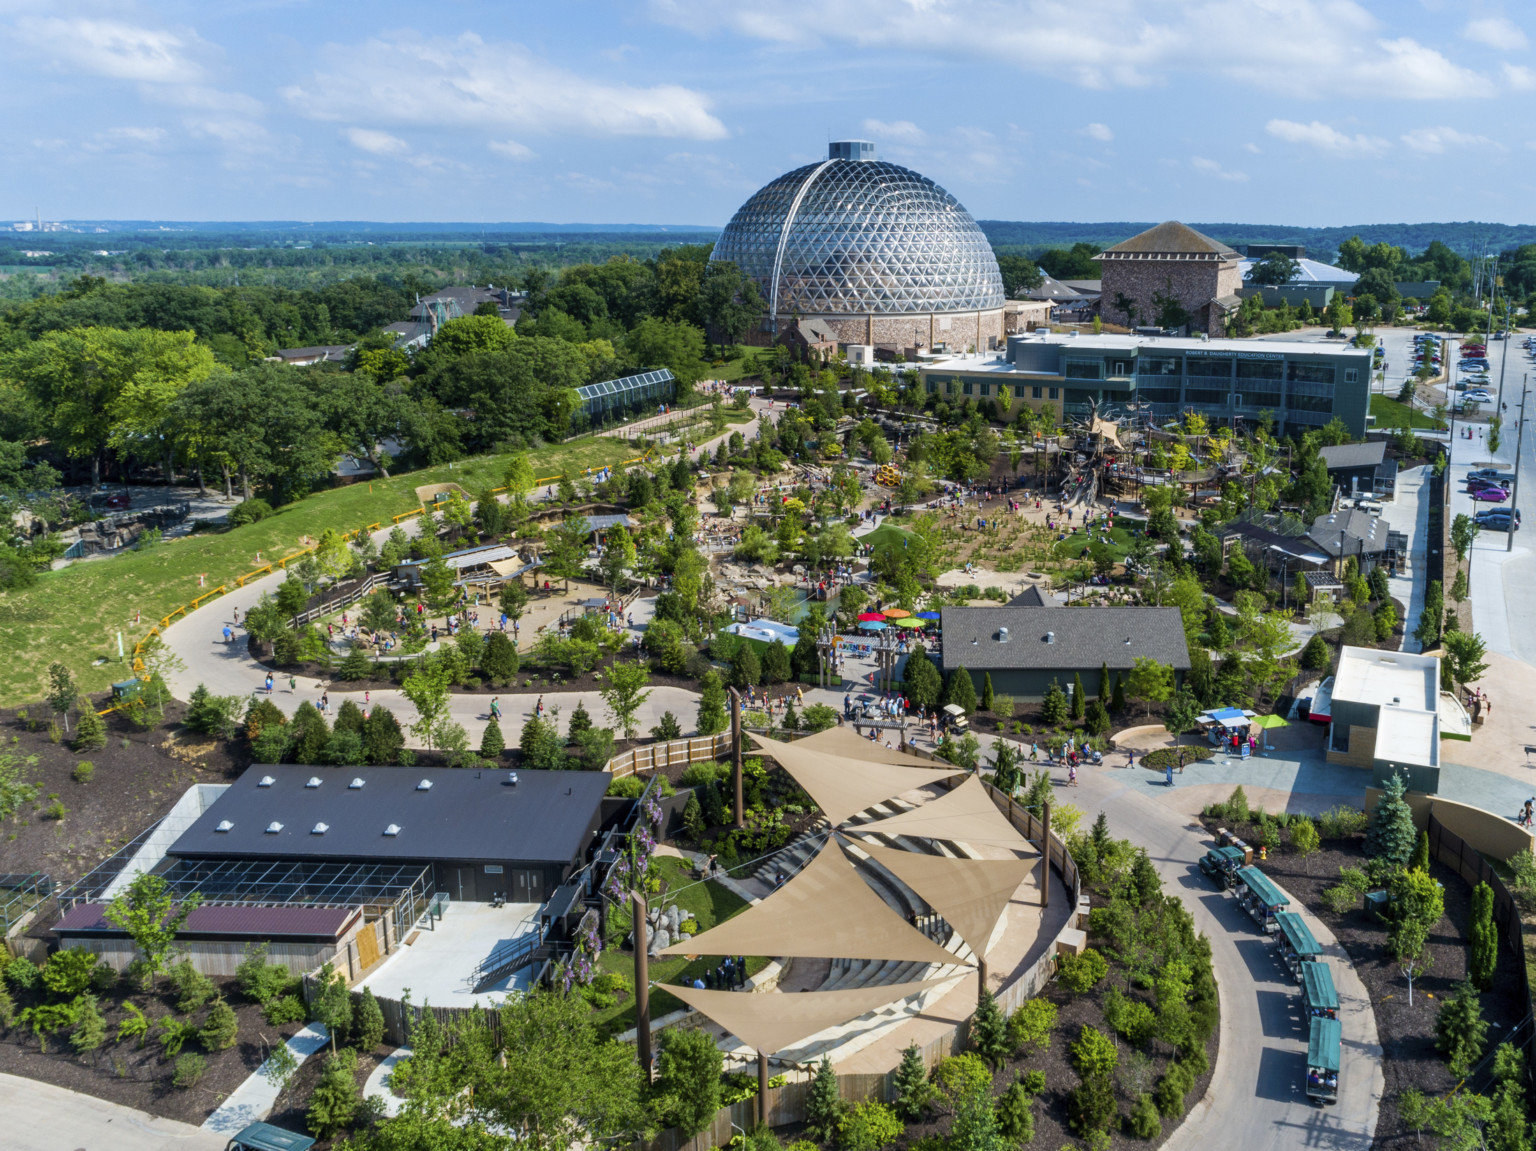 Aerial view of the Omaha Zoo, with a large glass domed building at center back